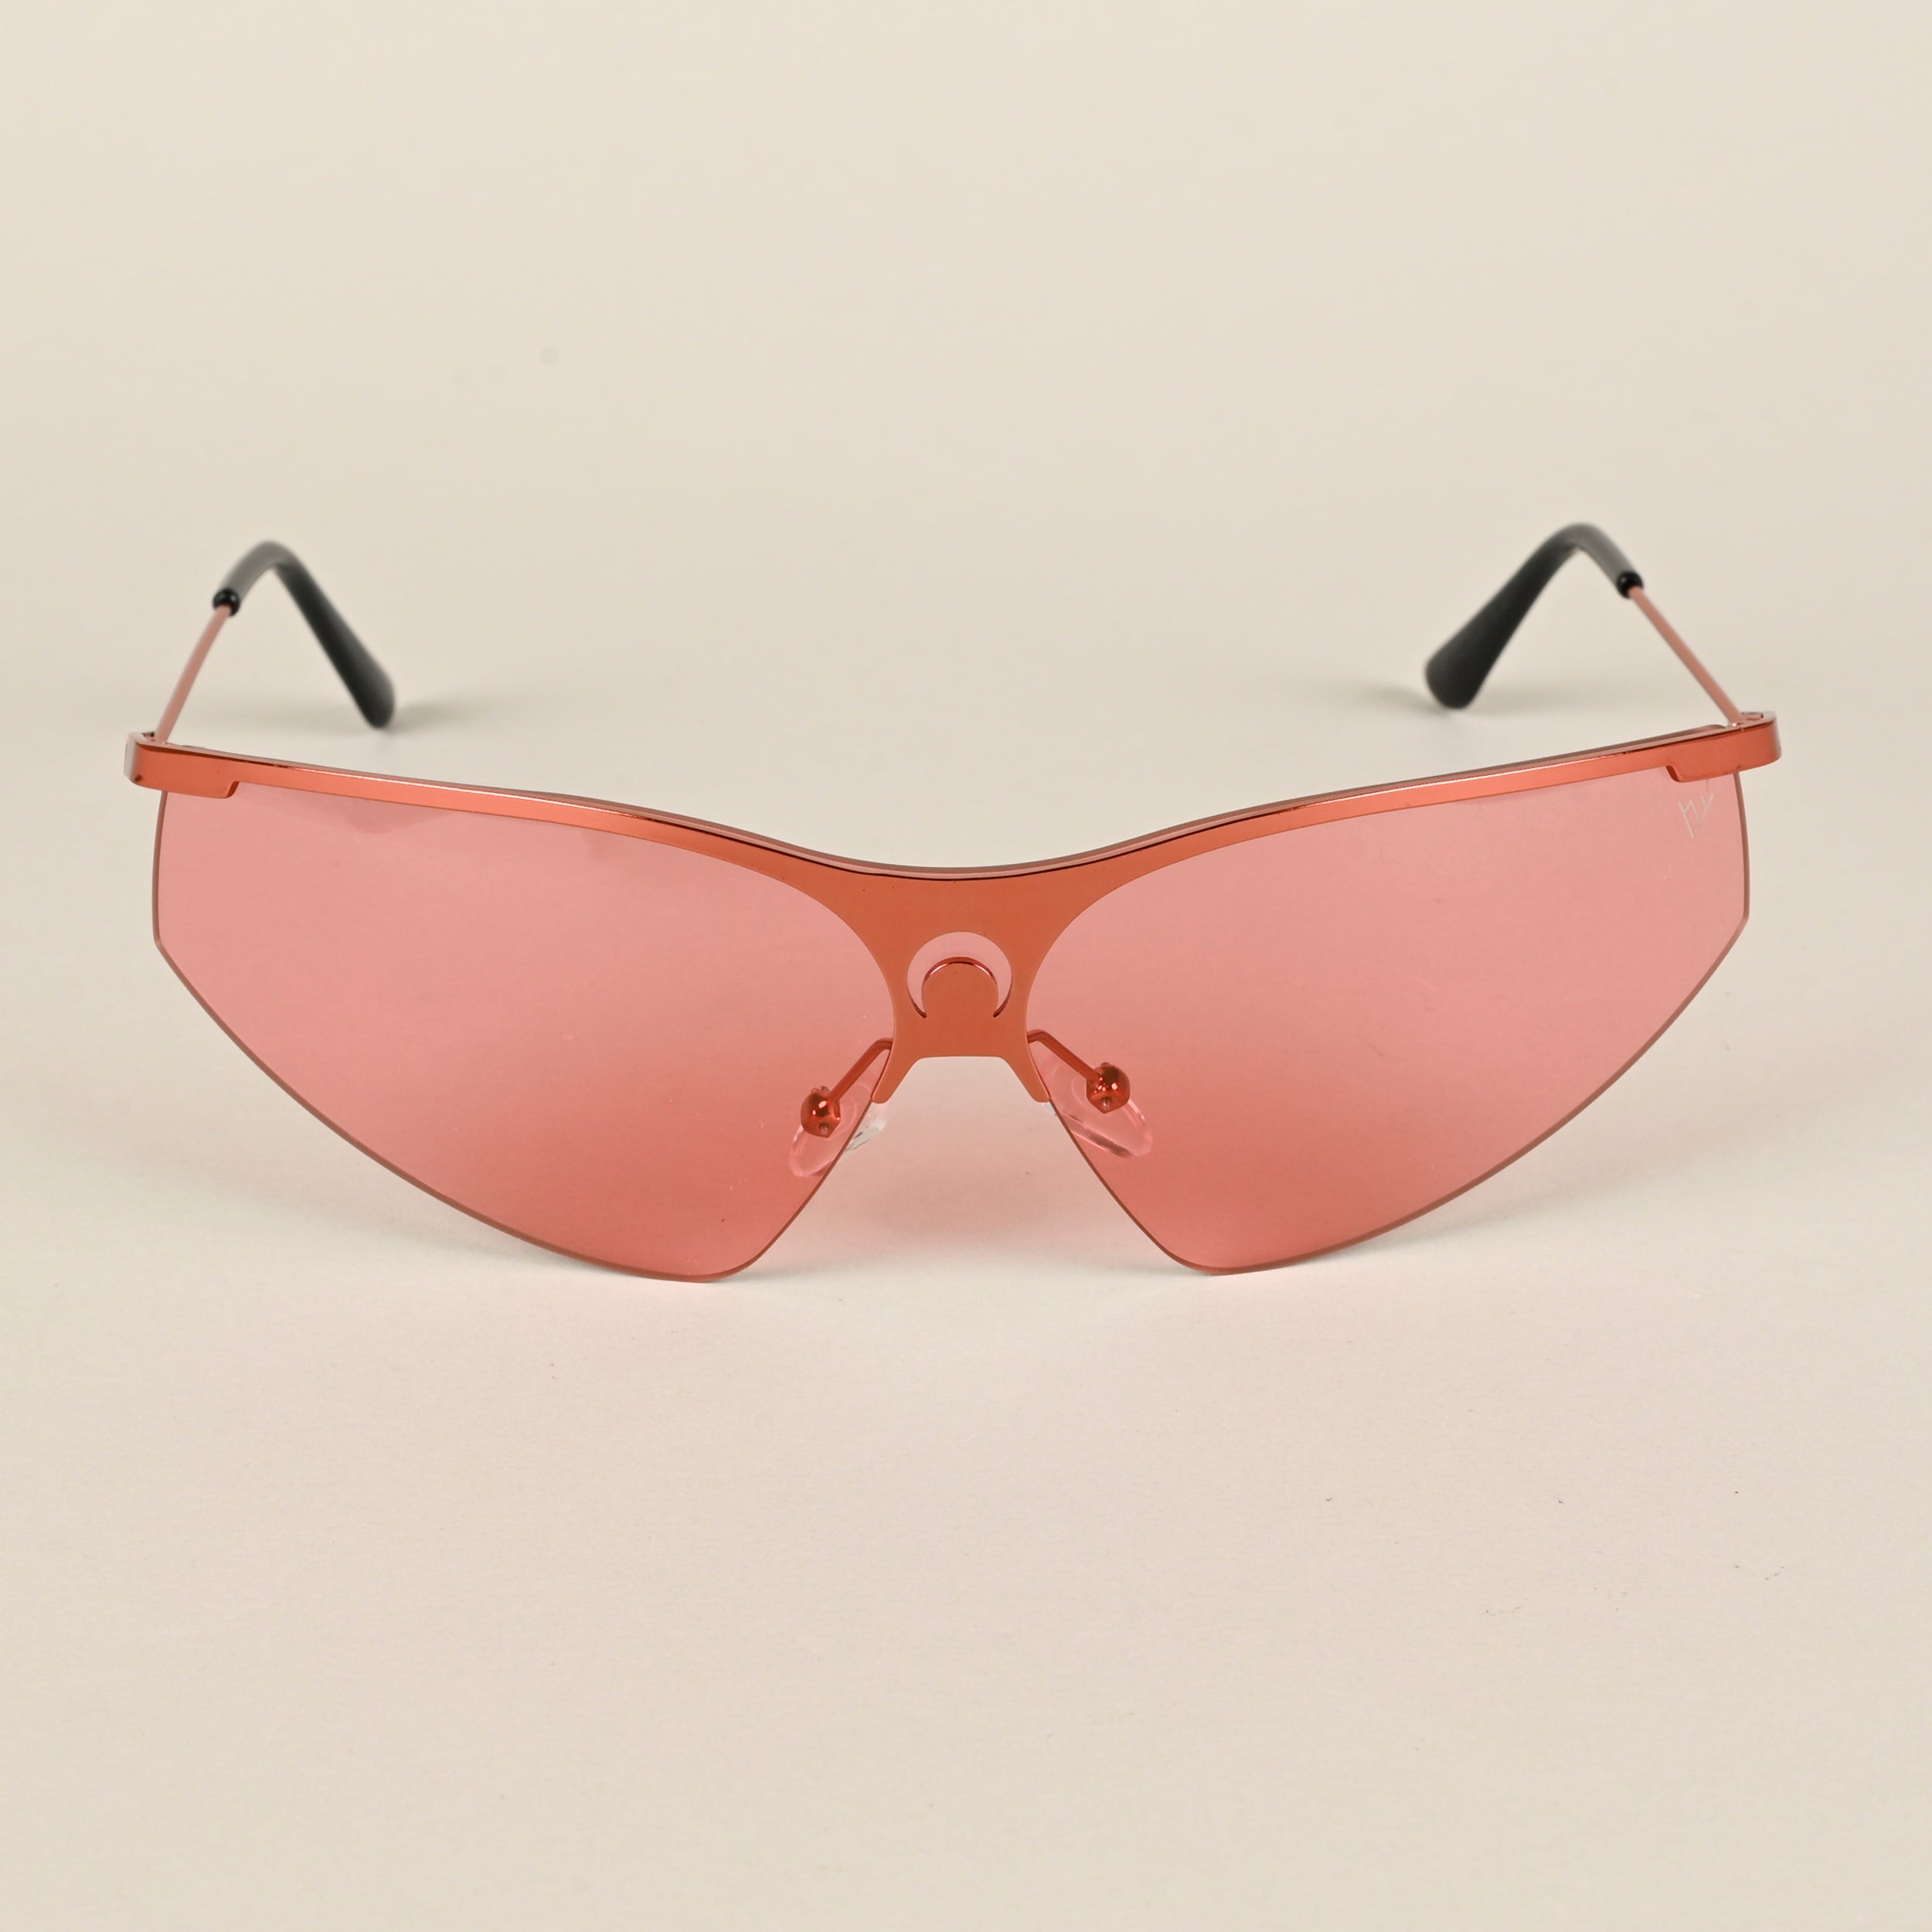 Voyage Red Wrap-Around Sunglasses for Men & Women - MG4221